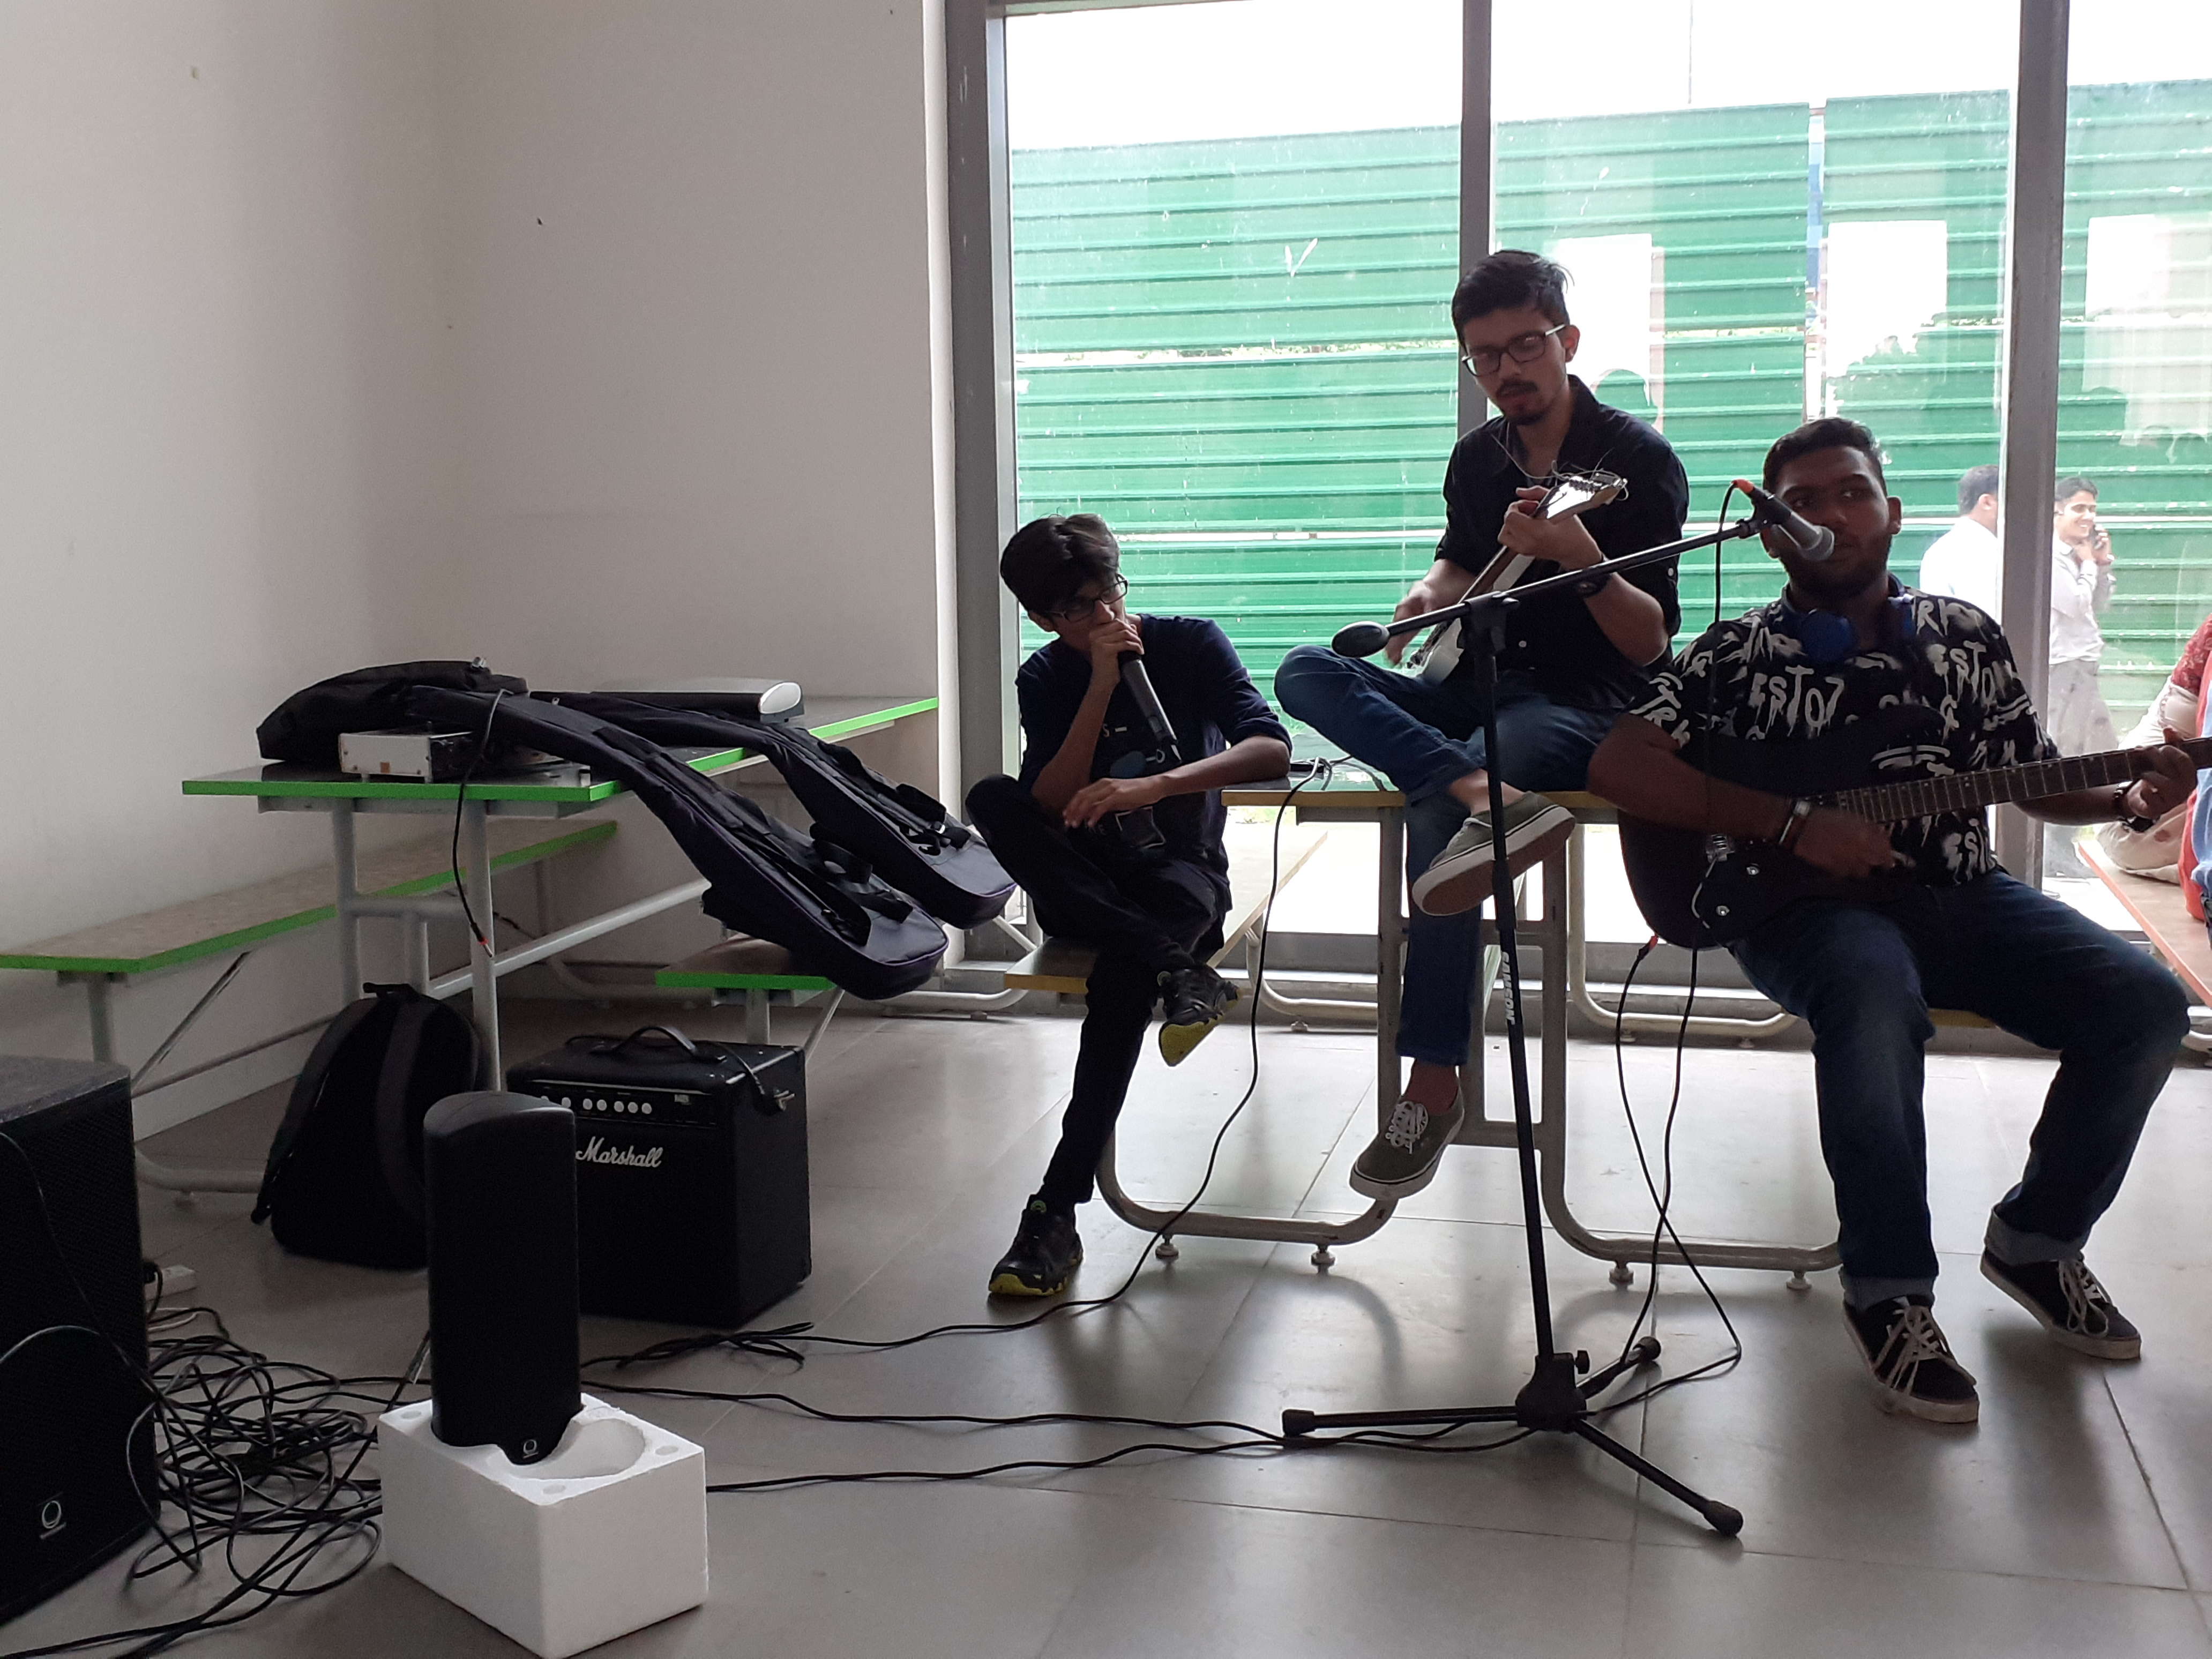 Students from Bennett University's music club, Advaita, perform on the occasion of Teachers’ Day to give the event a musical edge